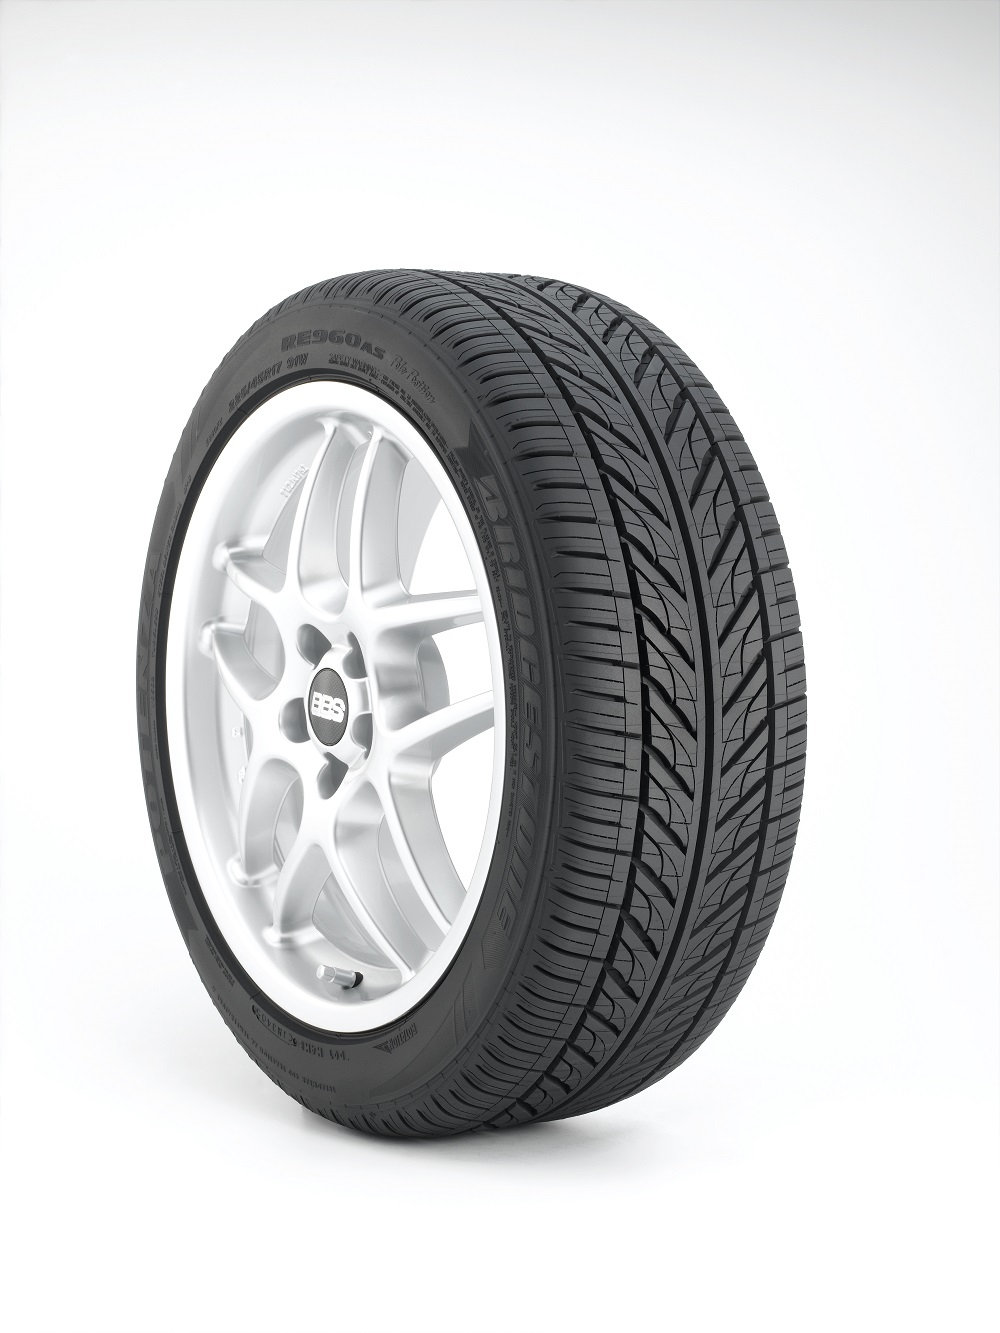 Product Image 1 of 1. Potenza RE960 A/S Pole Position